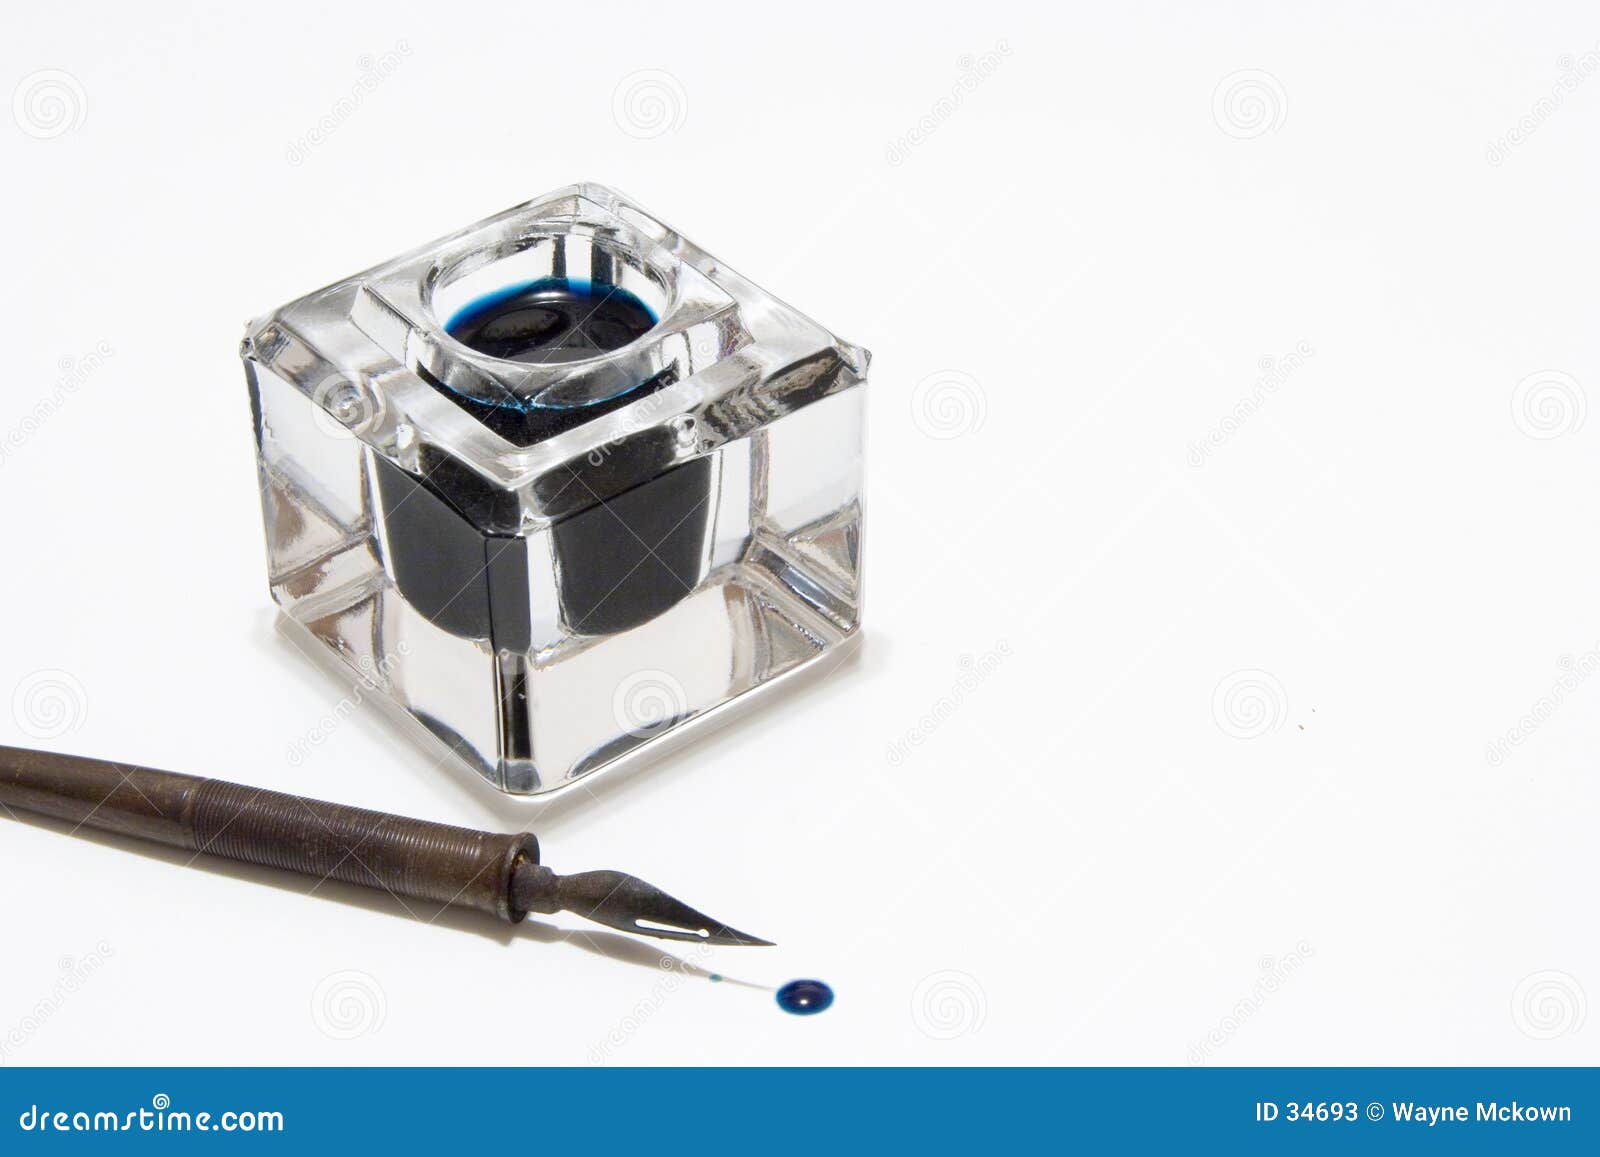 pen and inkwell